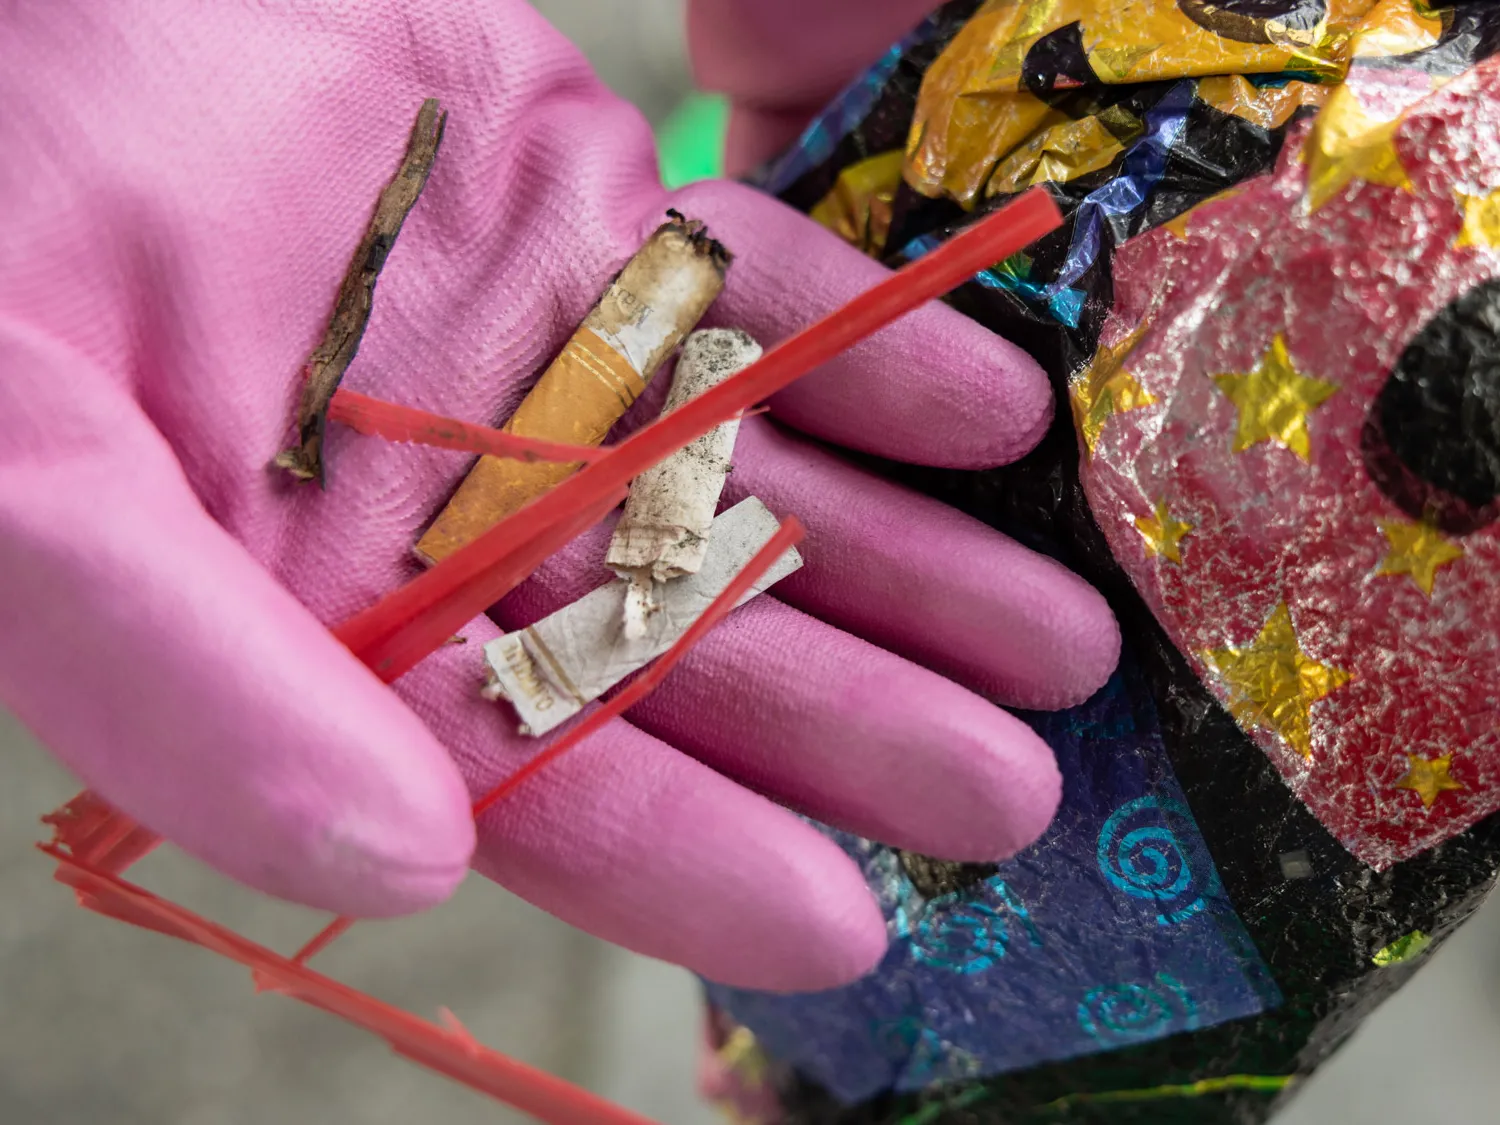 This photo shows someone's gloved hand holding trash-old straws, cigarette butts. In the background is a deflated mylar balloon, more trash picked up from the Put-In-Bay beach..